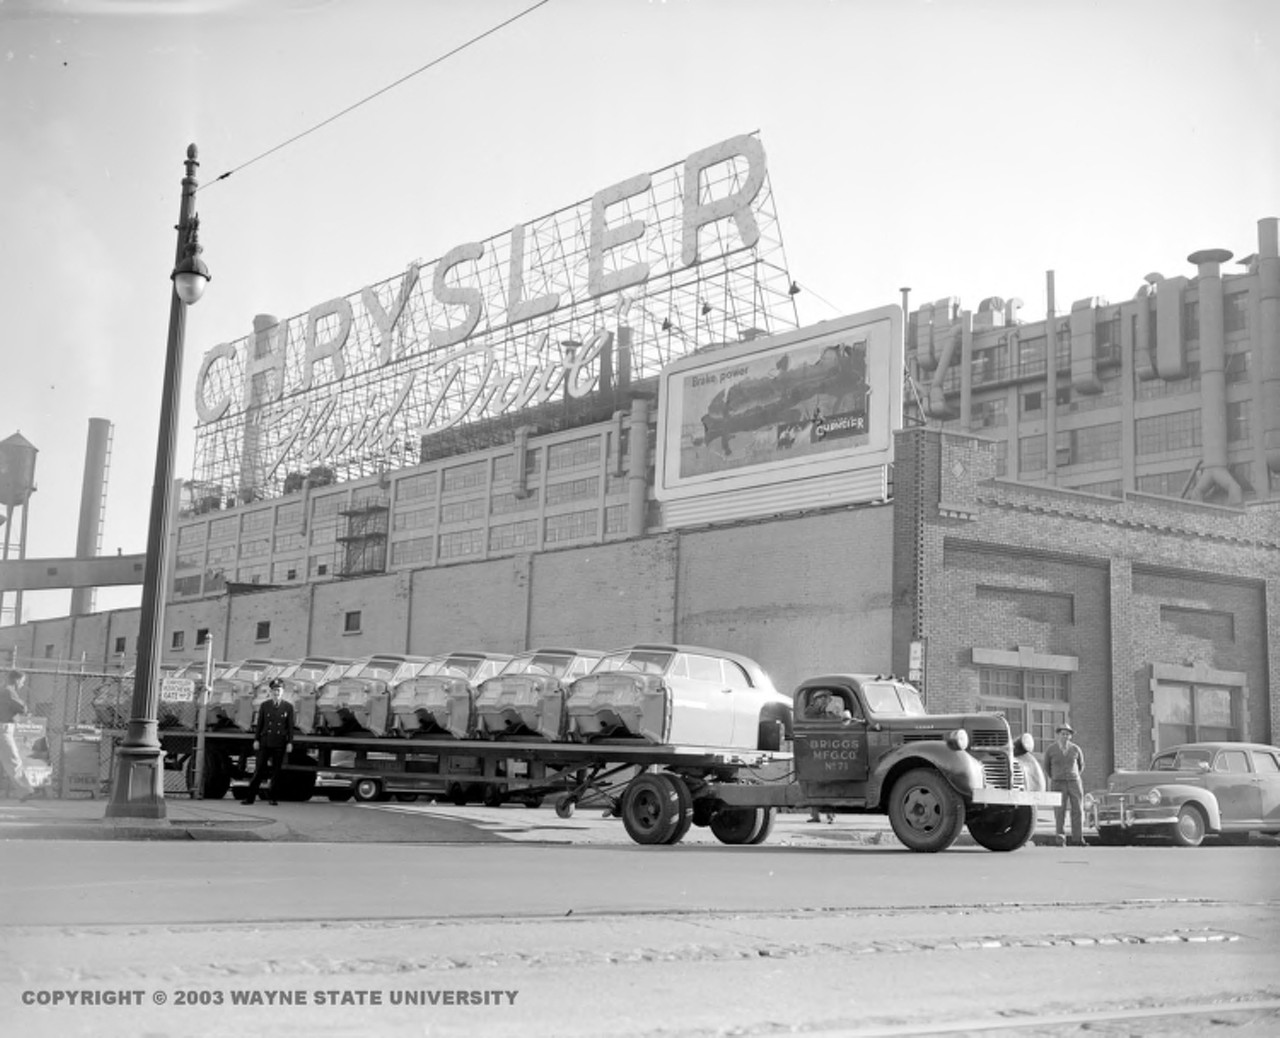 1950 - Chrysler Motor Car Company in Detroit 
Front view of the Chrysler plant sign.